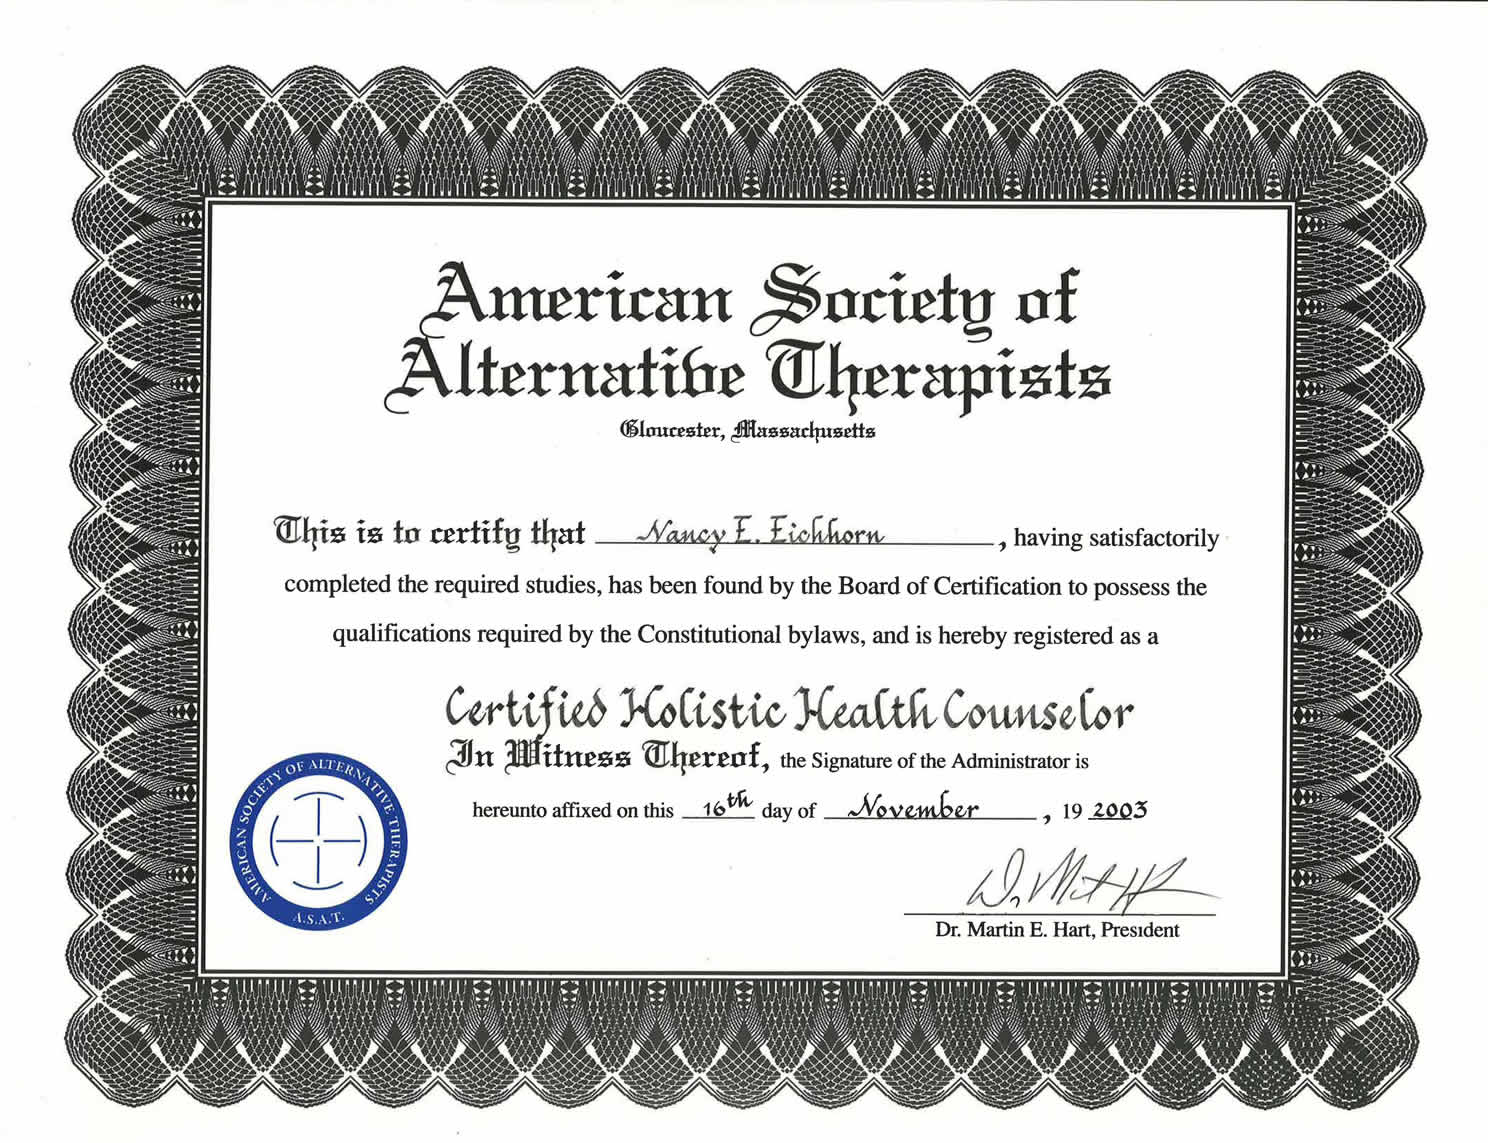 ASAT certified holistic counselor